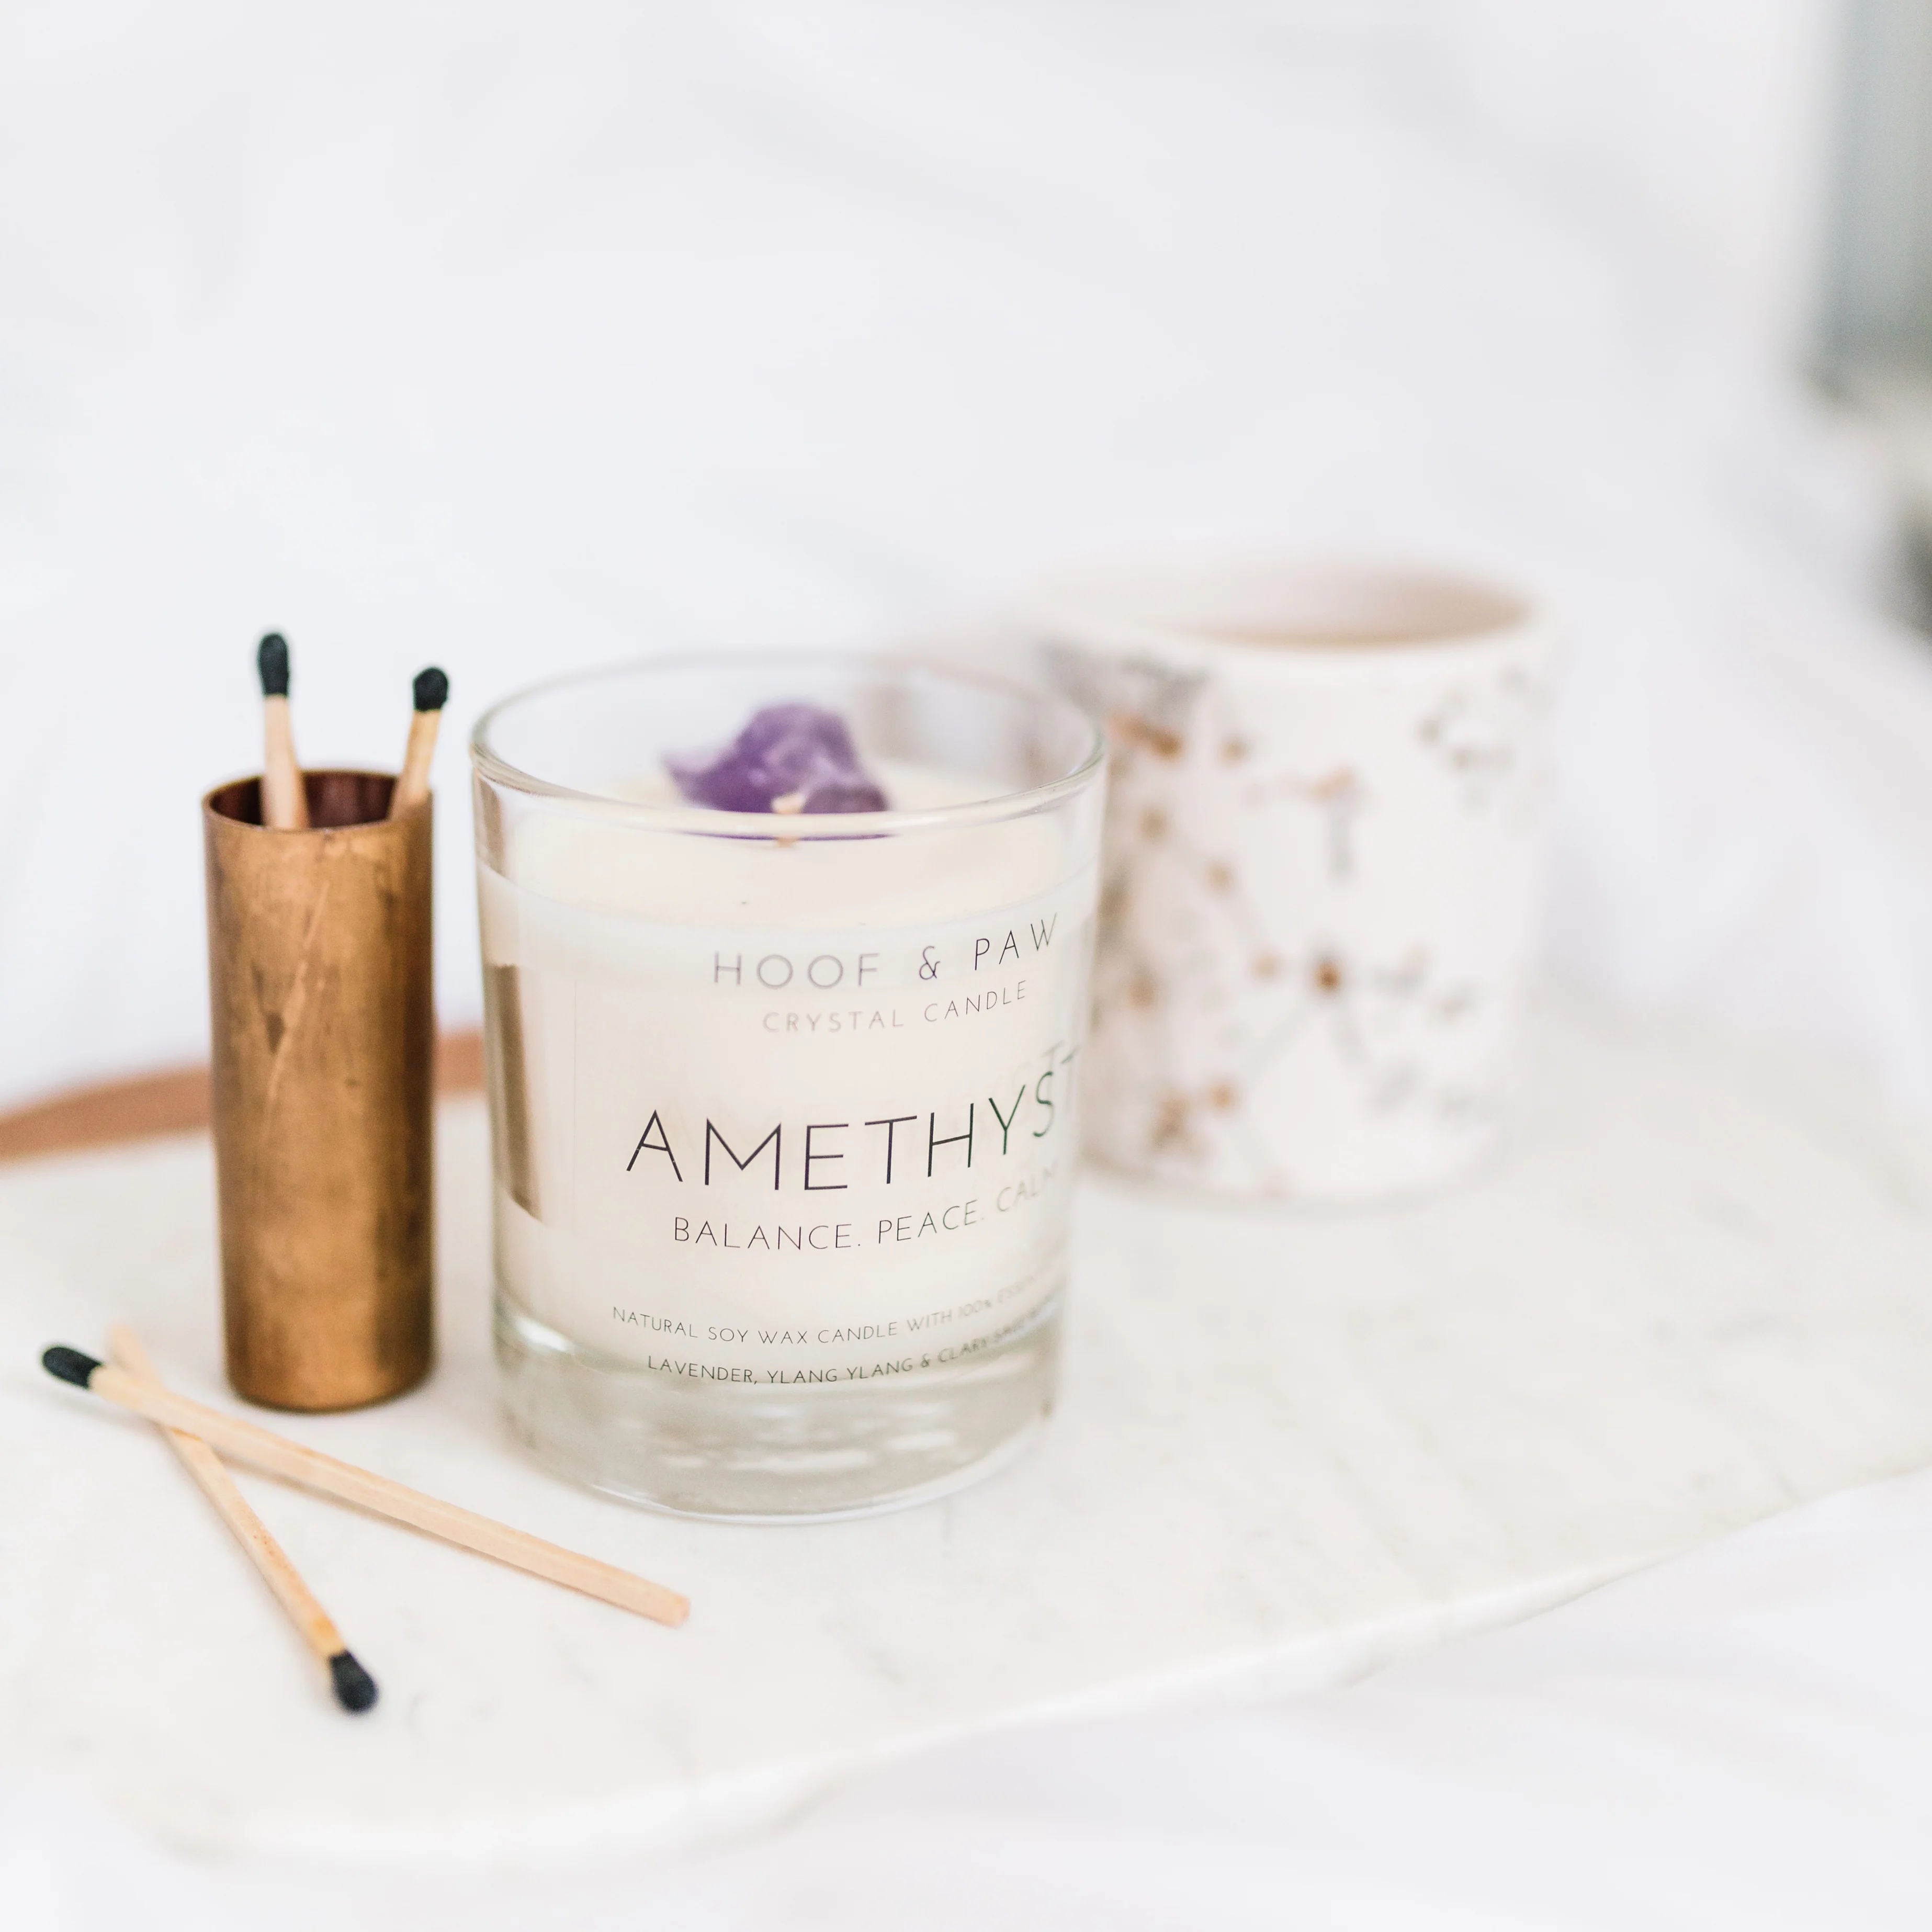 Amethyst Crystal Candle ~ Hand-poured Soy Wax